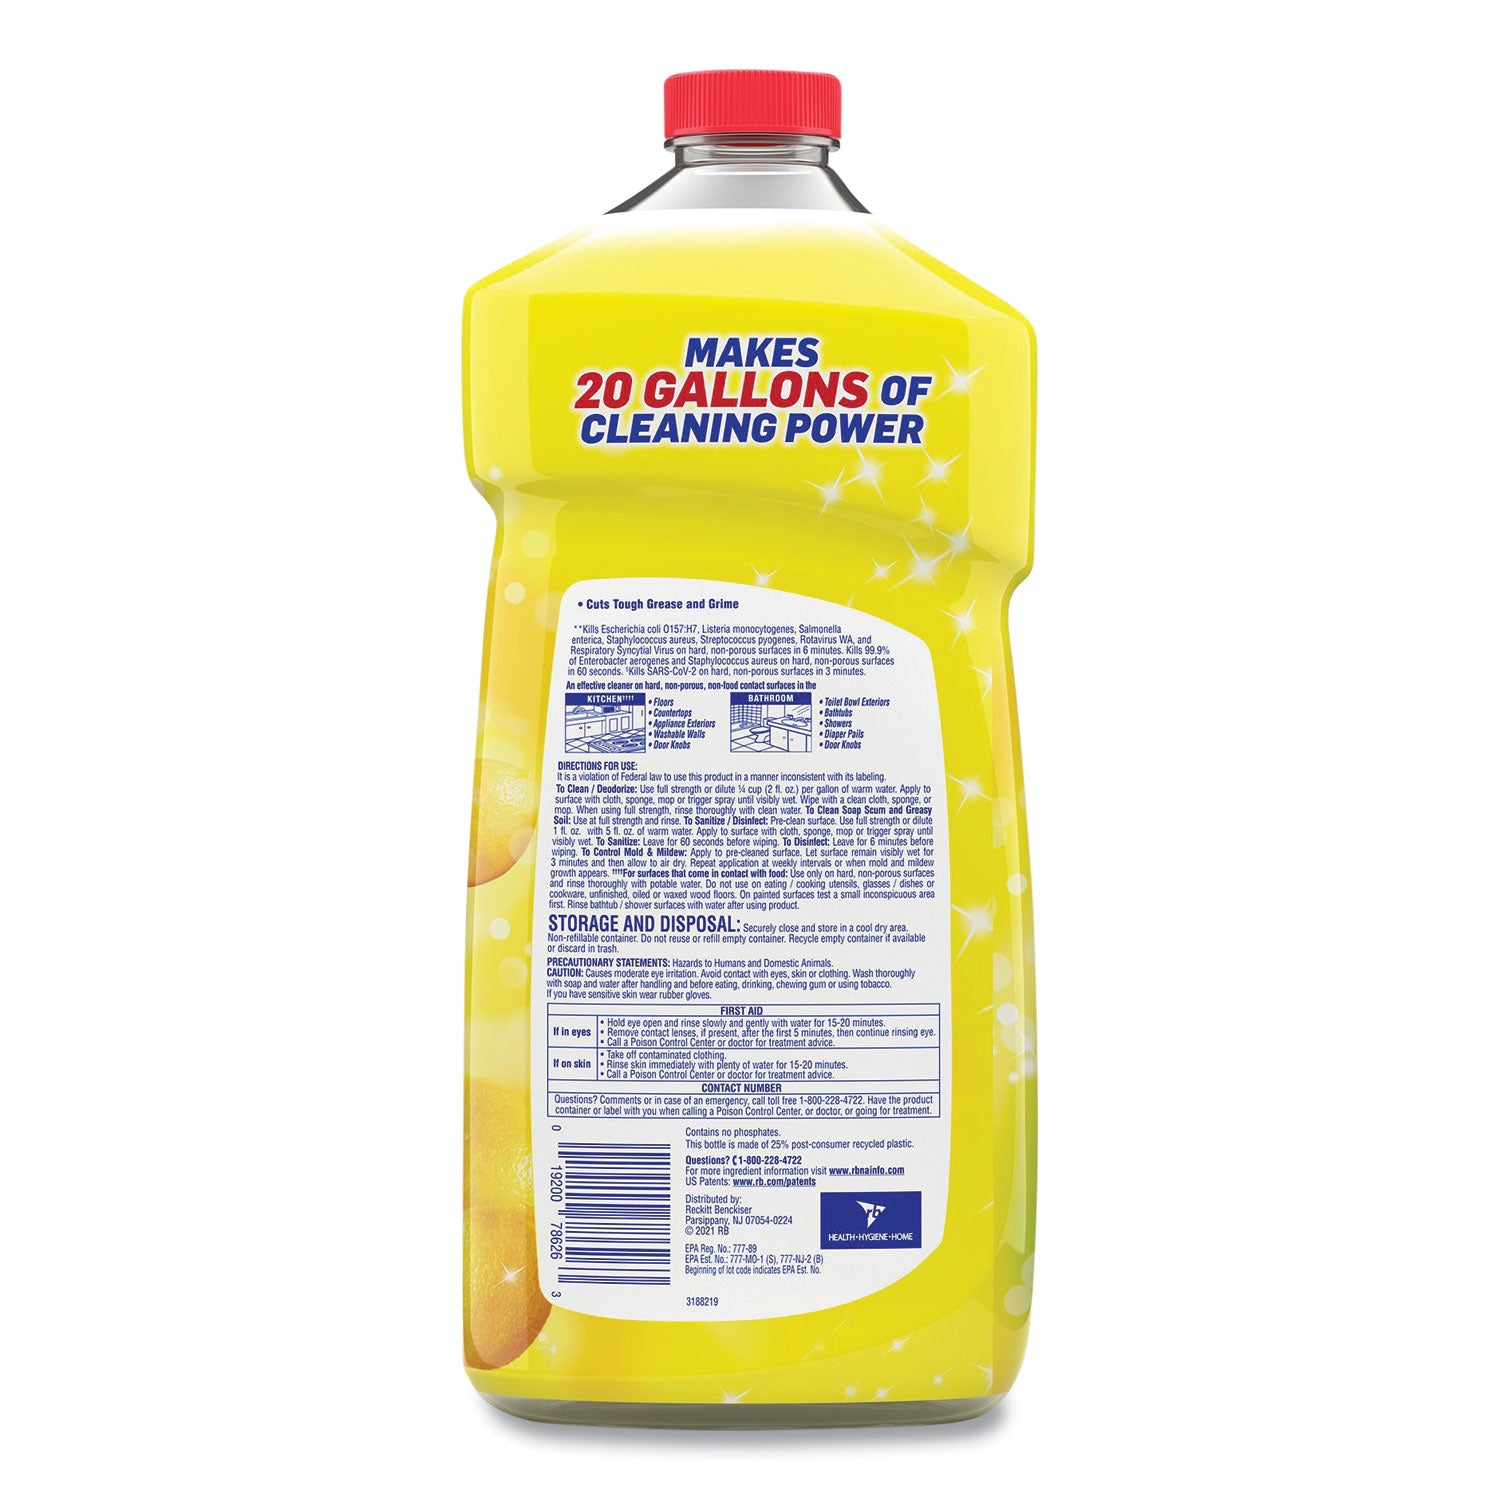 clean-and-fresh-multi-surface-cleaner-sparkling-lemon-and-sunflower-essence-40-oz-bottle-9-carton_rac78626ct - 3